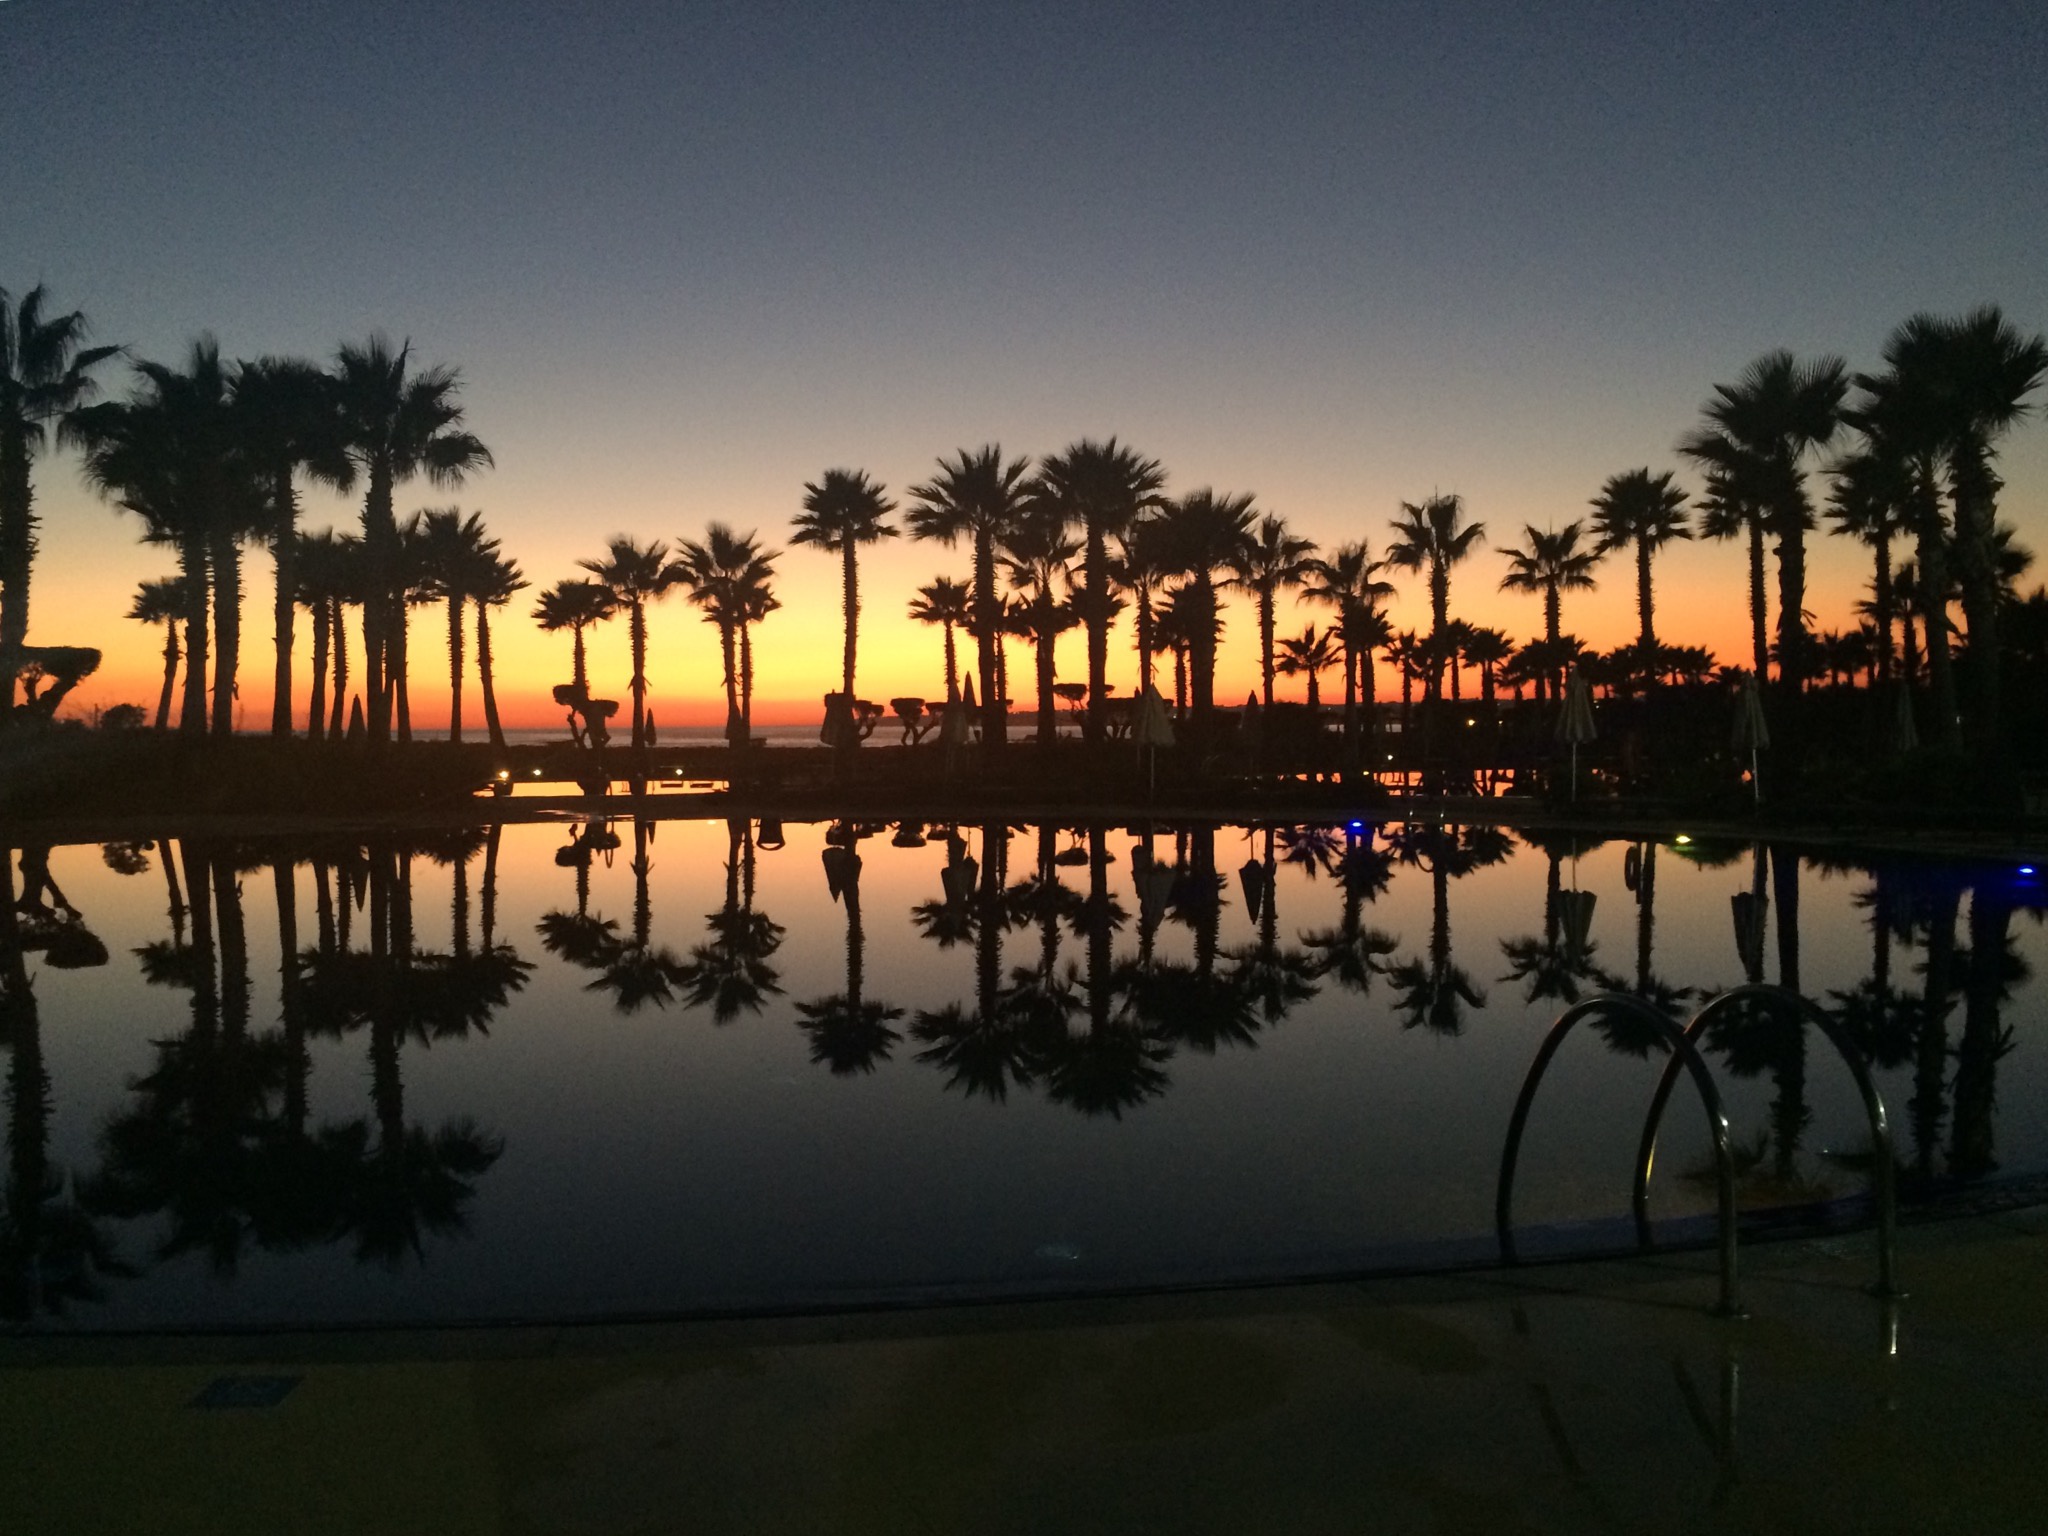 A serene sunset Salgados, Algarve, with the silhouette of palm trees lining the horizon and their reflections in the calm waters of a resort's pool, encapsulating the peaceful ambiance of a luxury escape.